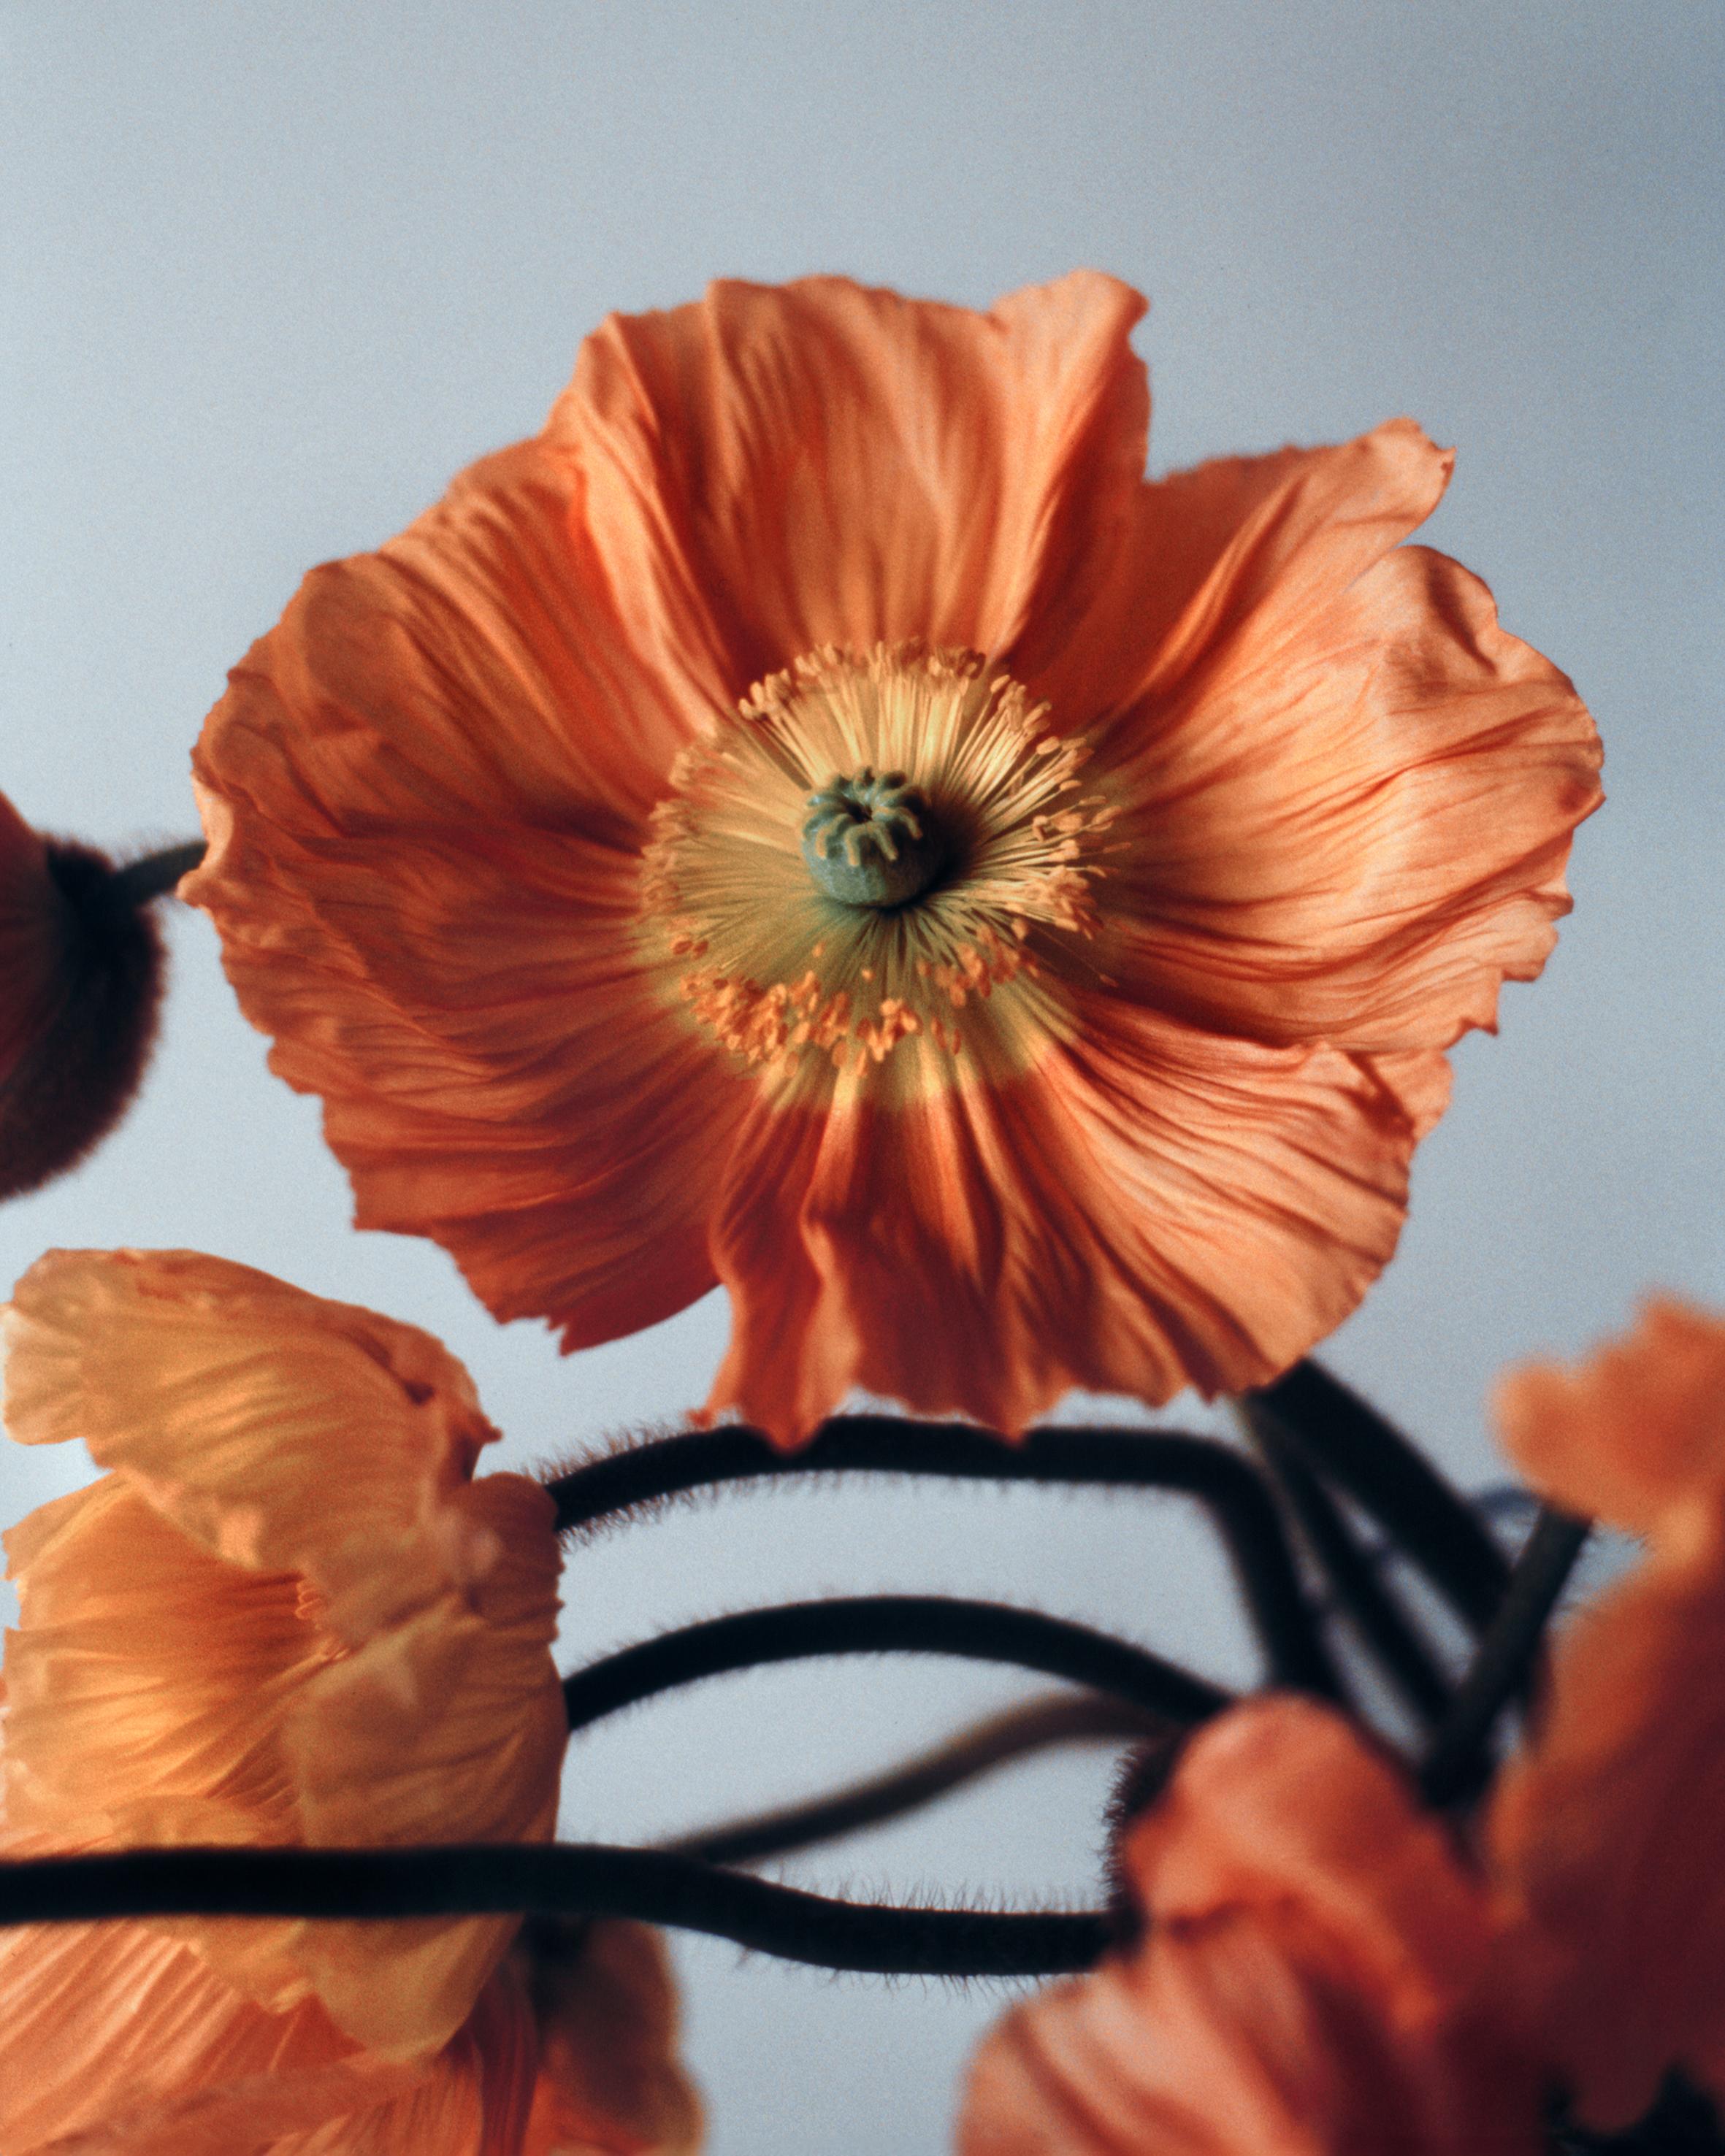 Ugne Pouwell Color Photograph - Orange Poppies No.2 - Analogue floral photography, Limited edition of 20